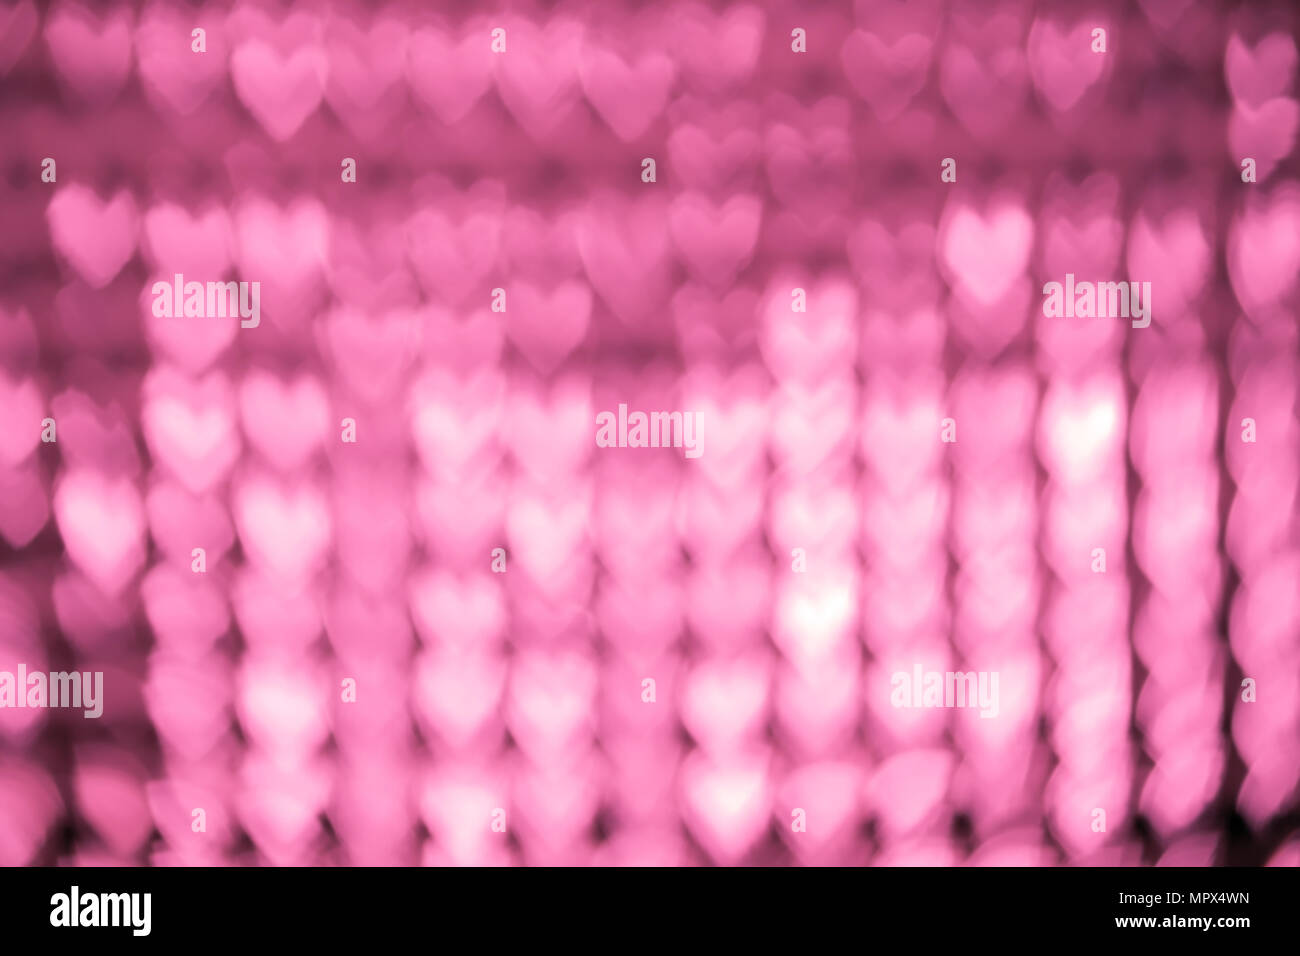 Abstract blur background with heart shaped. Pink tone. Stock Photo